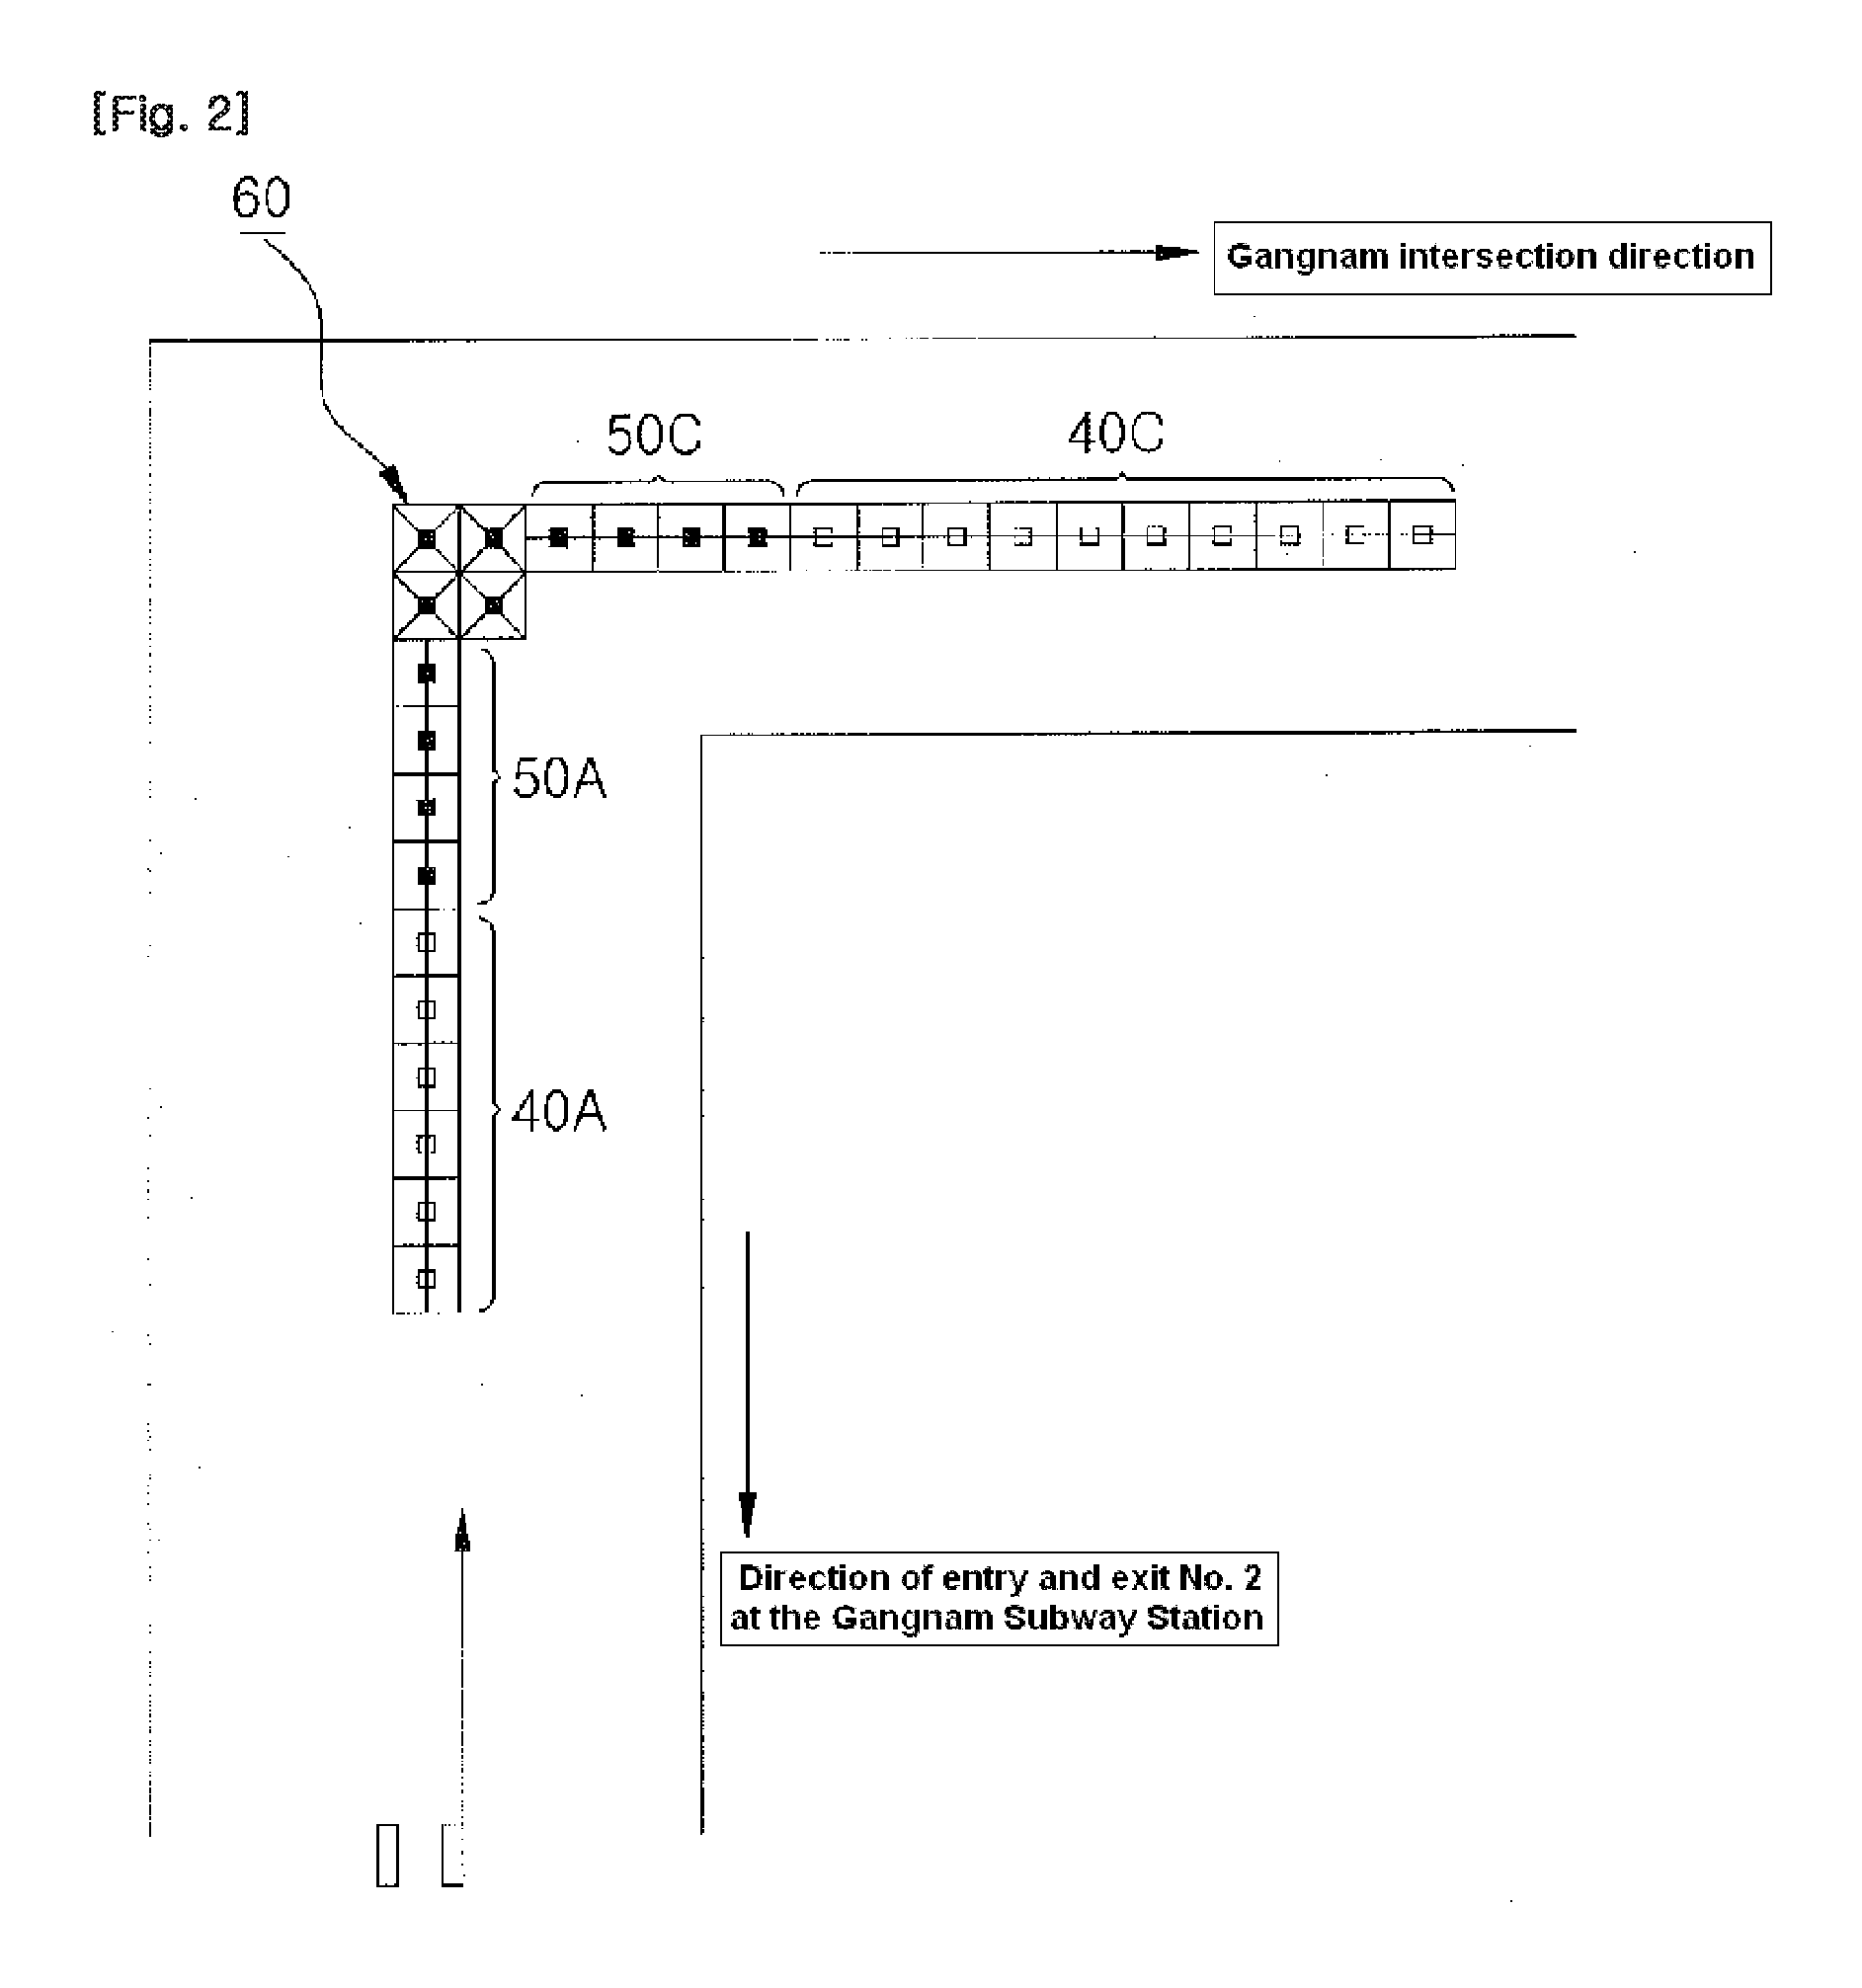 System and method for guiding the walking direction of the visually impaired using RFID blocks